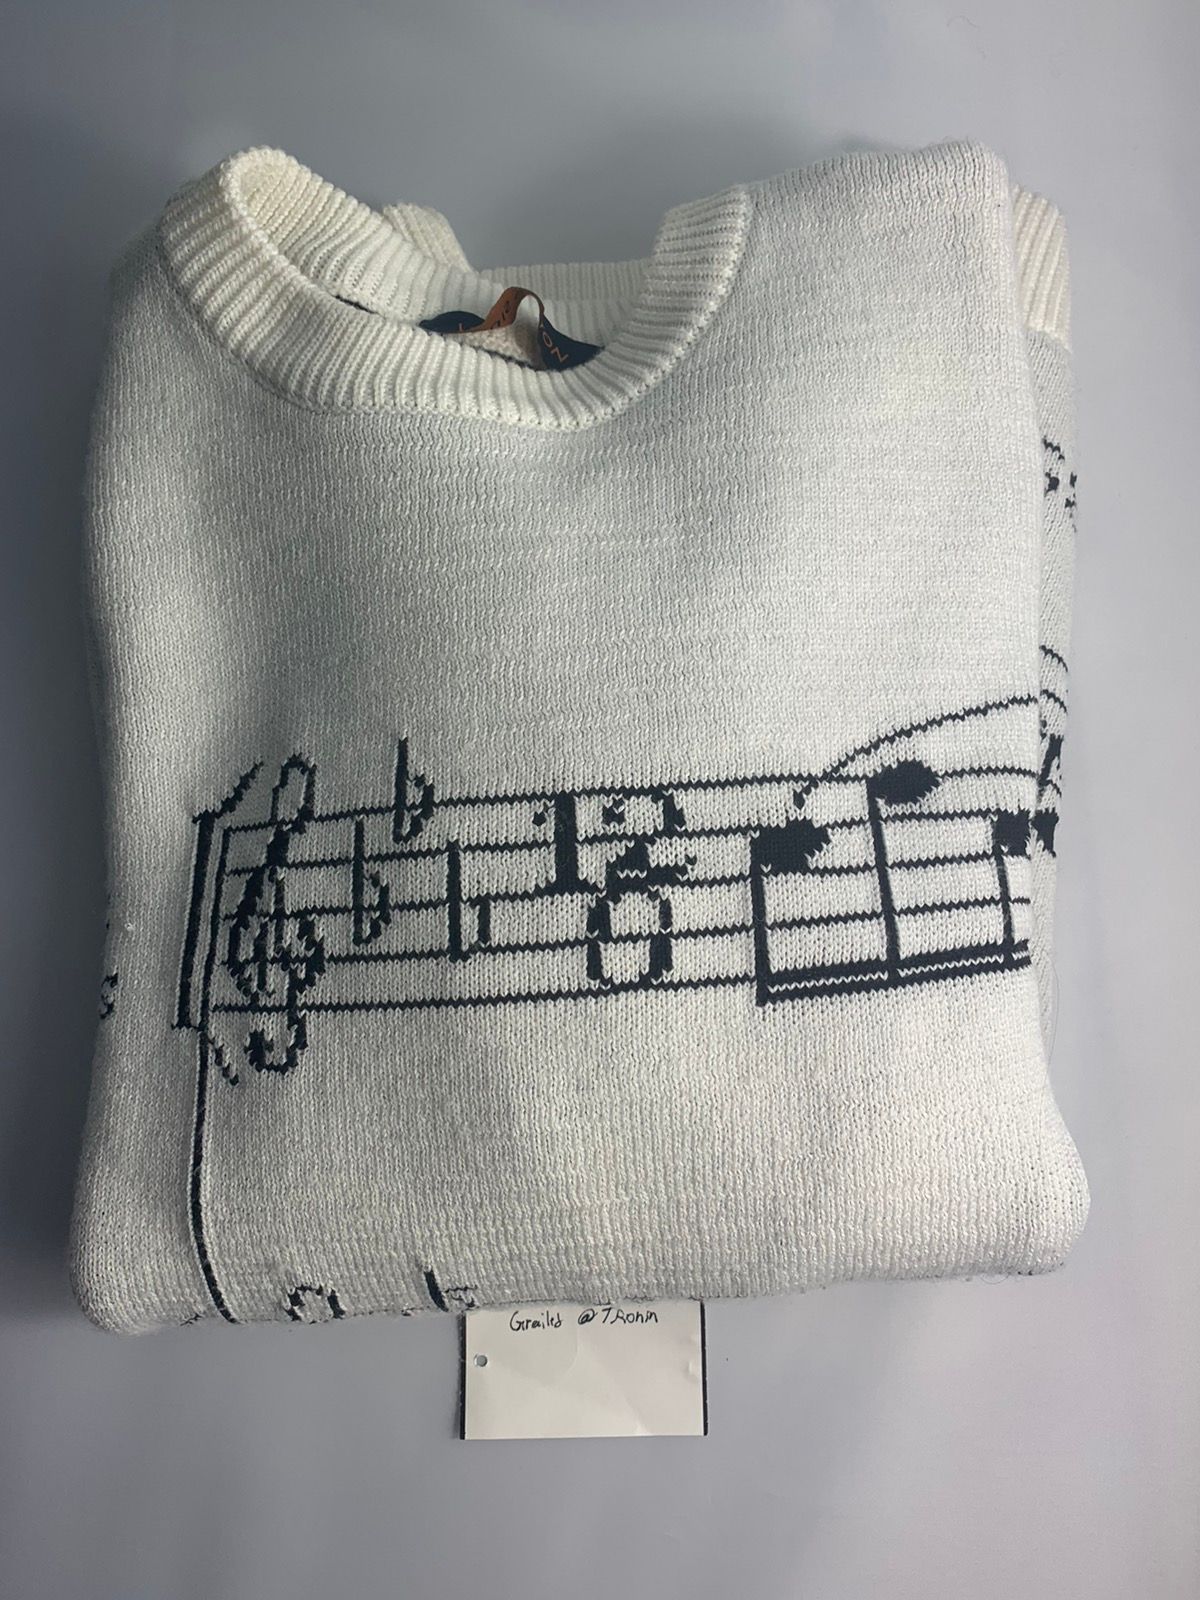 Louis Vuitton 2019 Partition Intarsia Sweater - Neutrals Sweaters, Clothing  - LOU287471